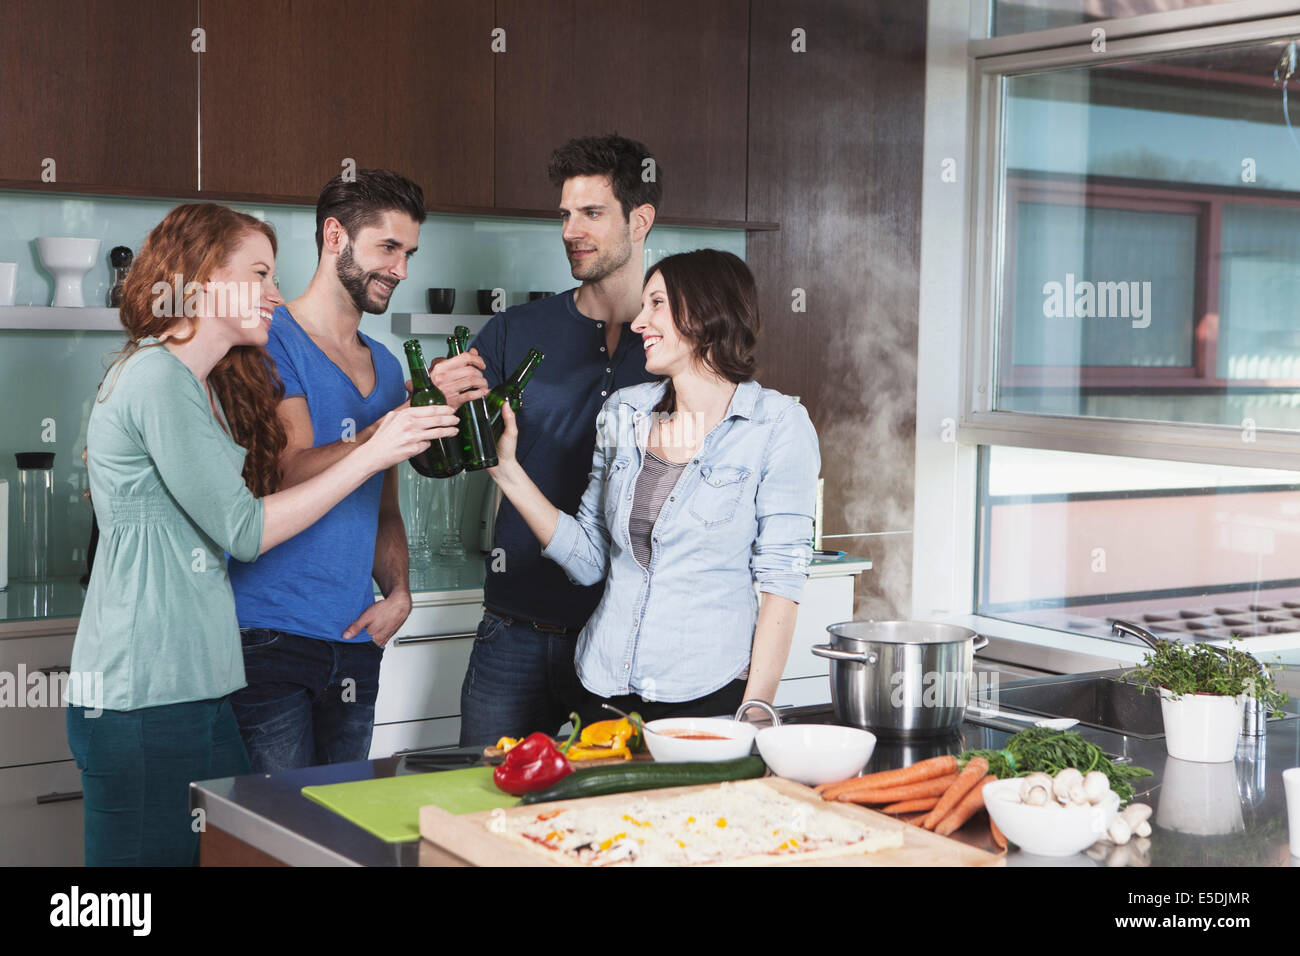 Portrait of four friends toasting with beer bottles in a kitchen Stock Photo